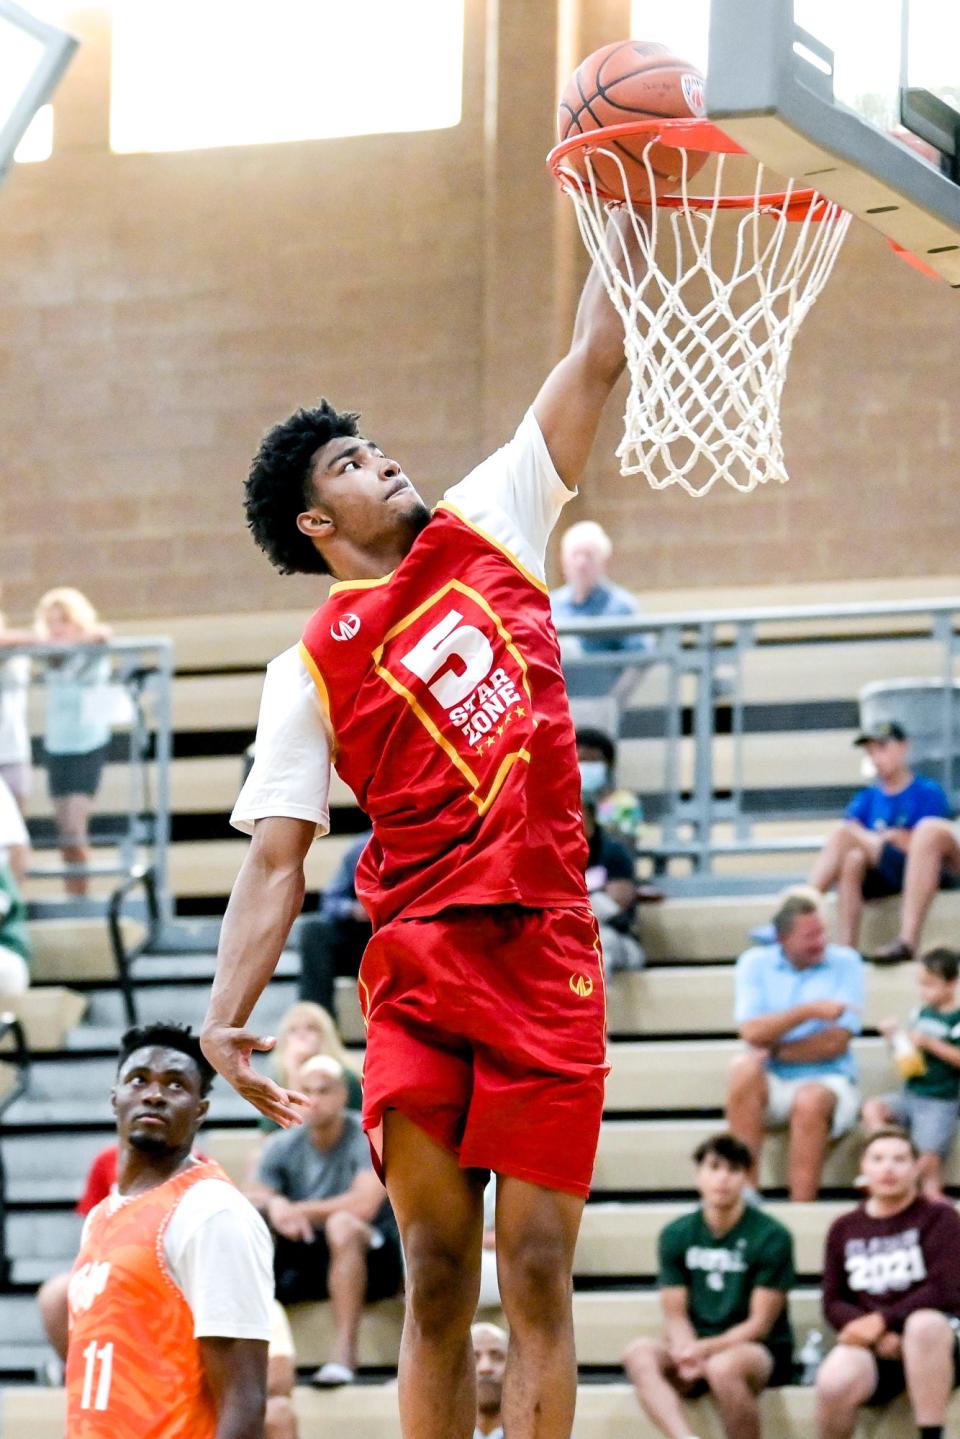 Team 5 Star Zone and MSU's Jaden Akins dunks on Thursday, June 30, 2022, in the game against Team Faygo during the Moneyball Pro-Am at Holt High School.